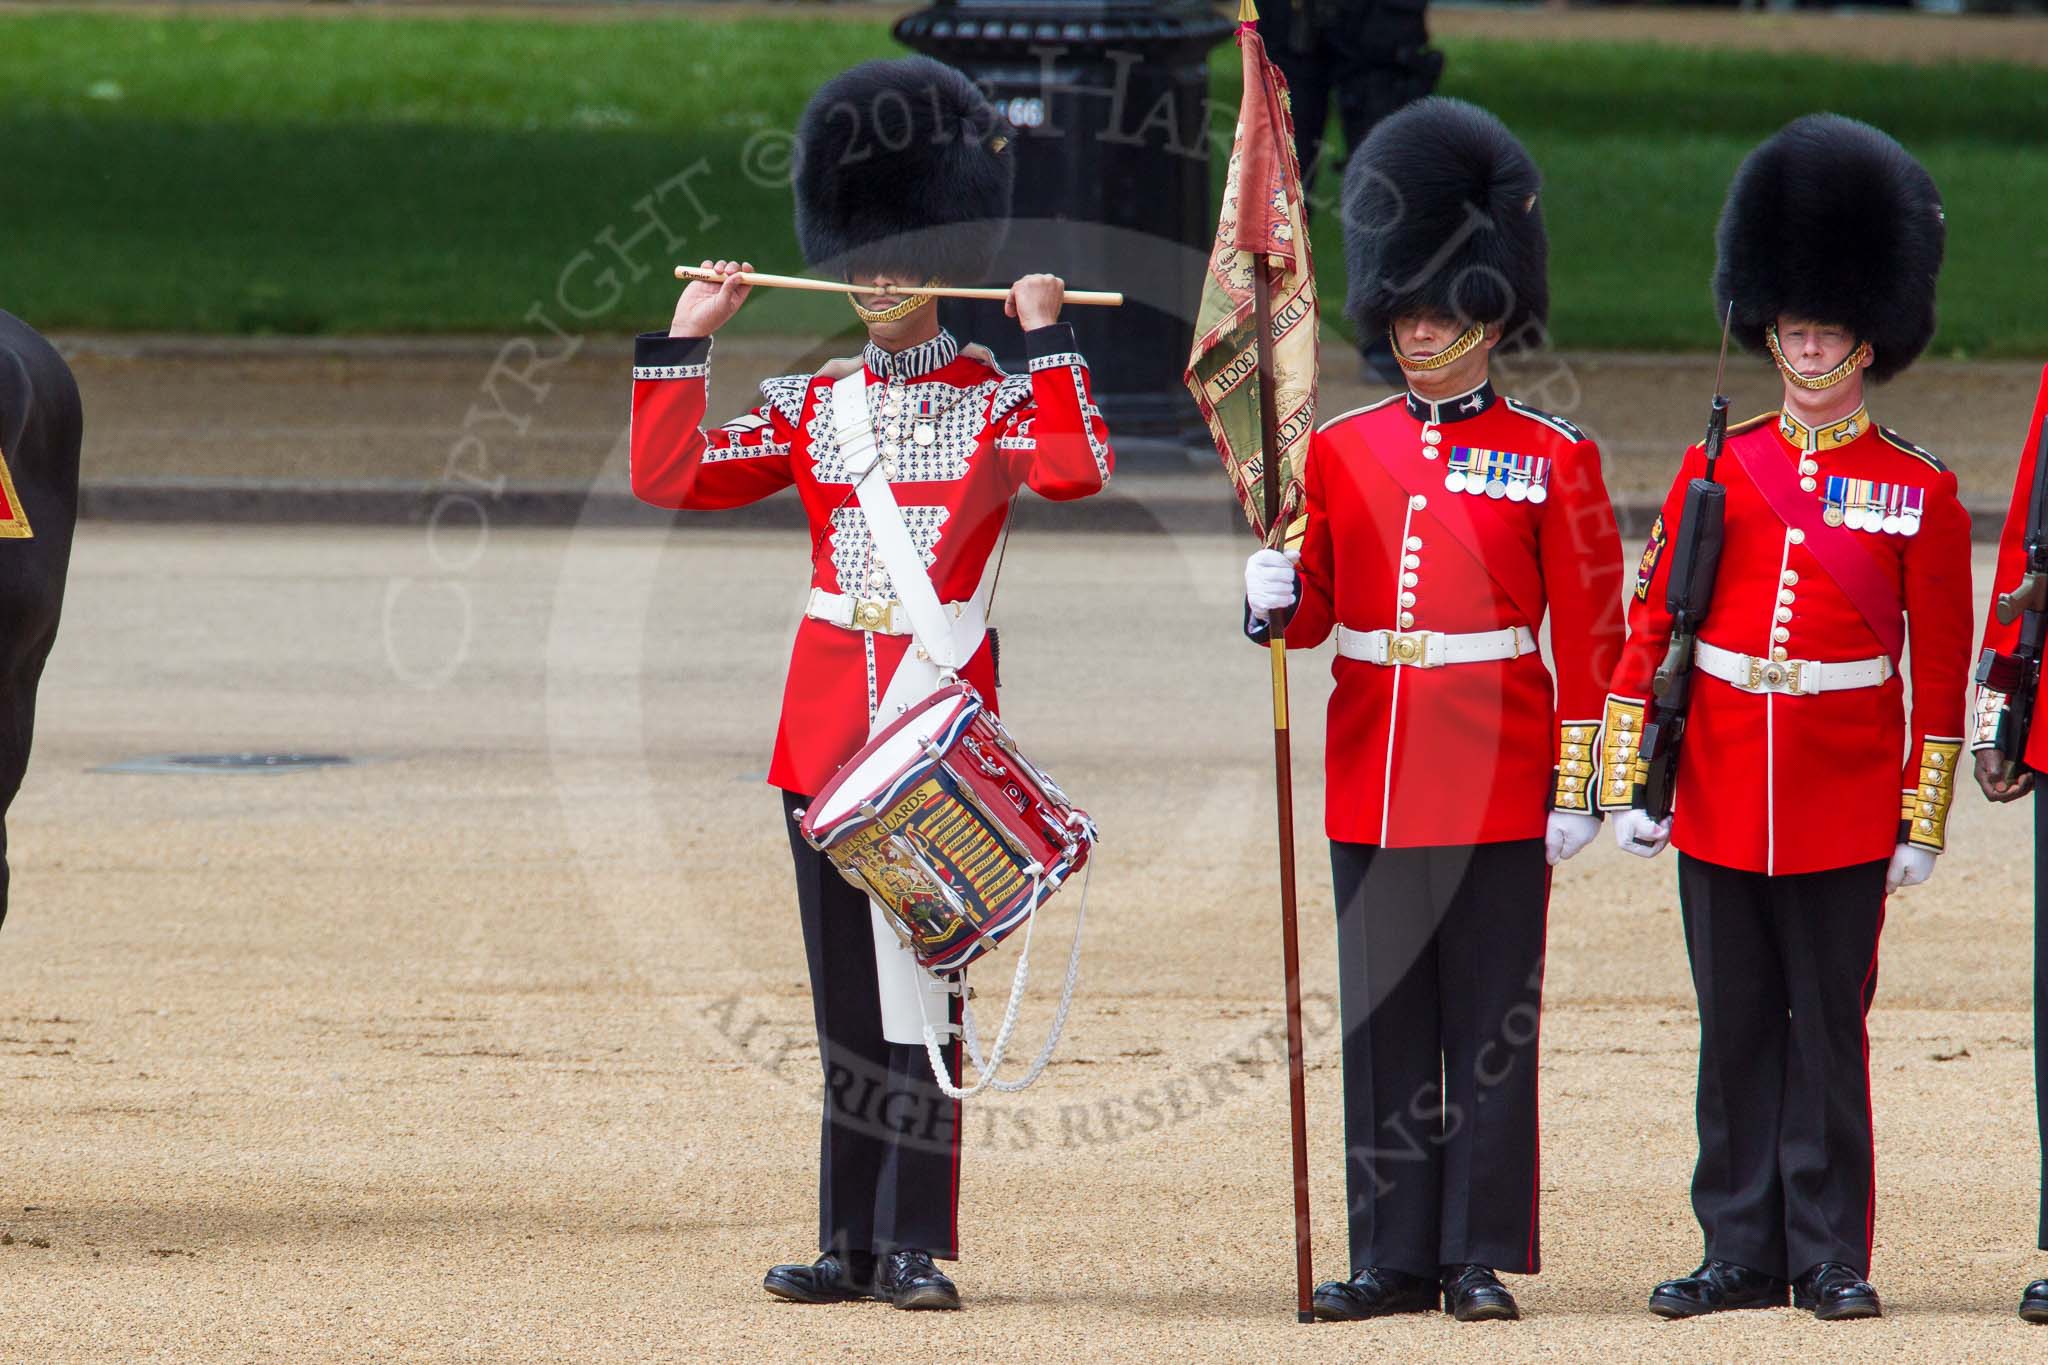 The Colonel's Review 2013: The "Lone Drummer", Lance Corporal Christopher Rees, salutes with his drumsticks before re-joining the band..
Horse Guards Parade, Westminster,
London SW1,

United Kingdom,
on 08 June 2013 at 11:14, image #468